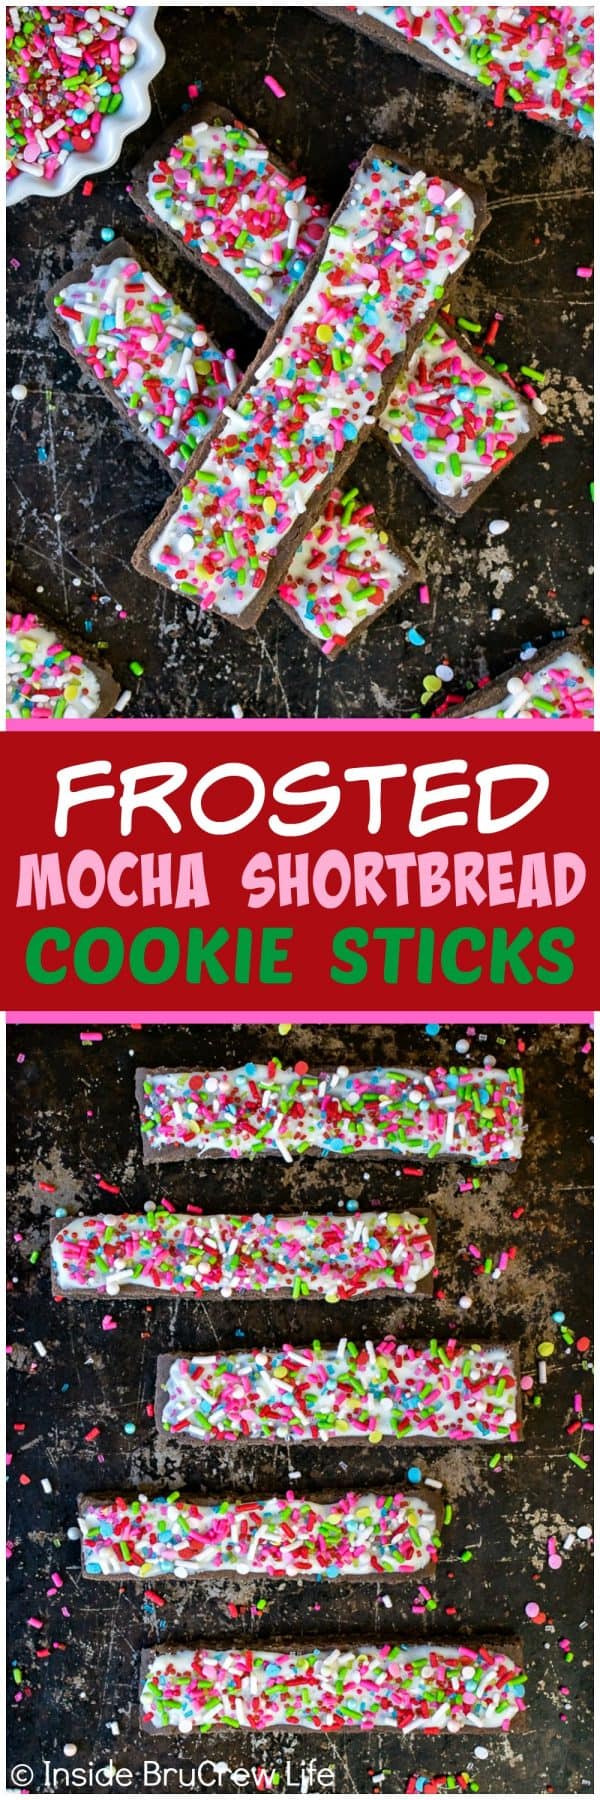 Frosted Mocha Shortbread Cookie Sticks - easy cookie sticks topped with white chocolate and lots of colorful sprinkles. Great recipe for holiday cookie exchanges or Christmas parties!